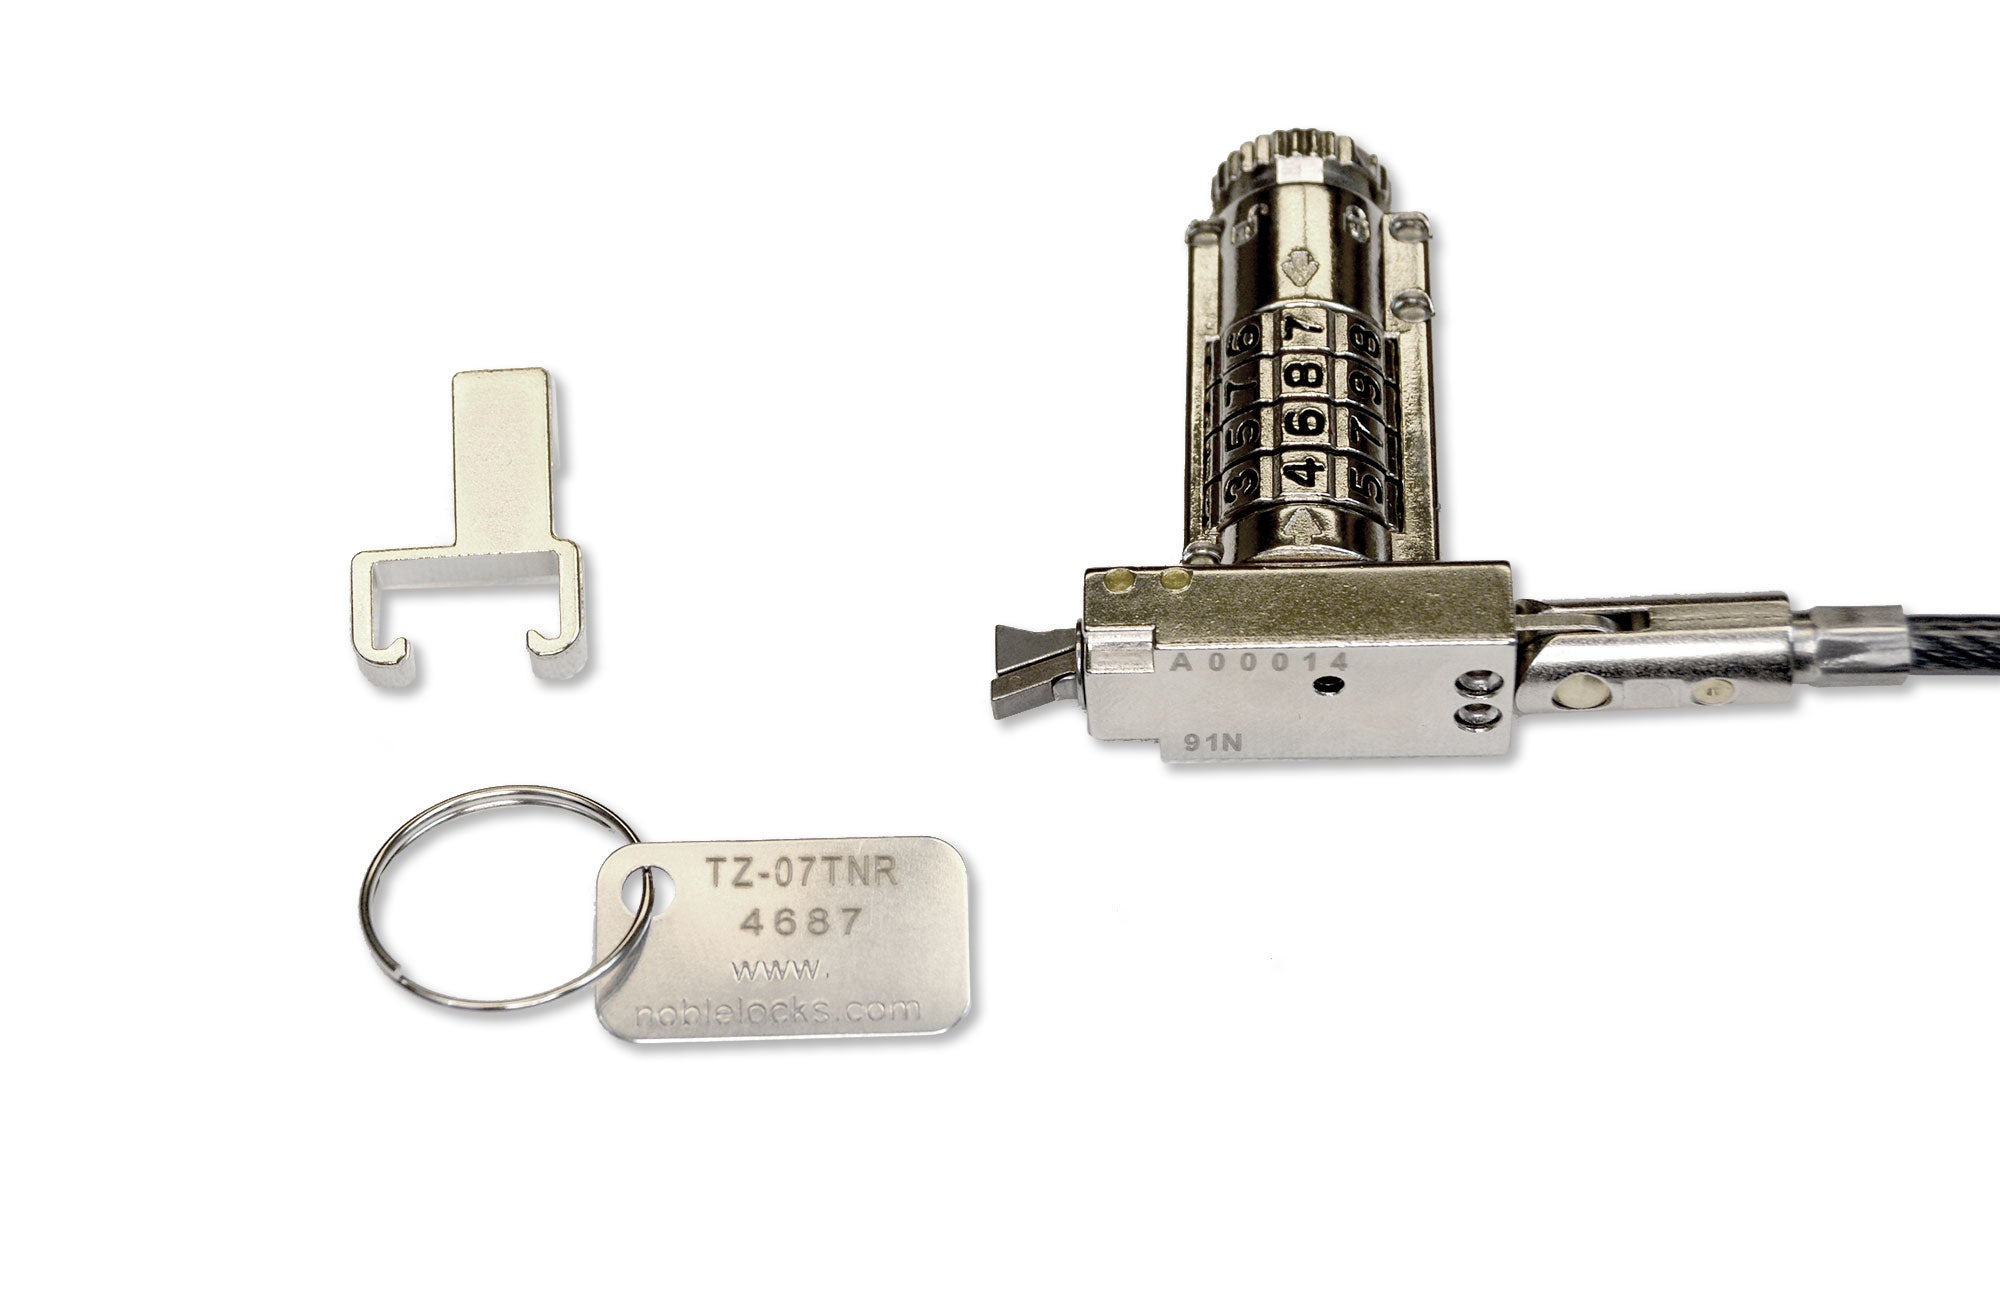 Locking technology with tradition: Burg-Wächter lock and bolt